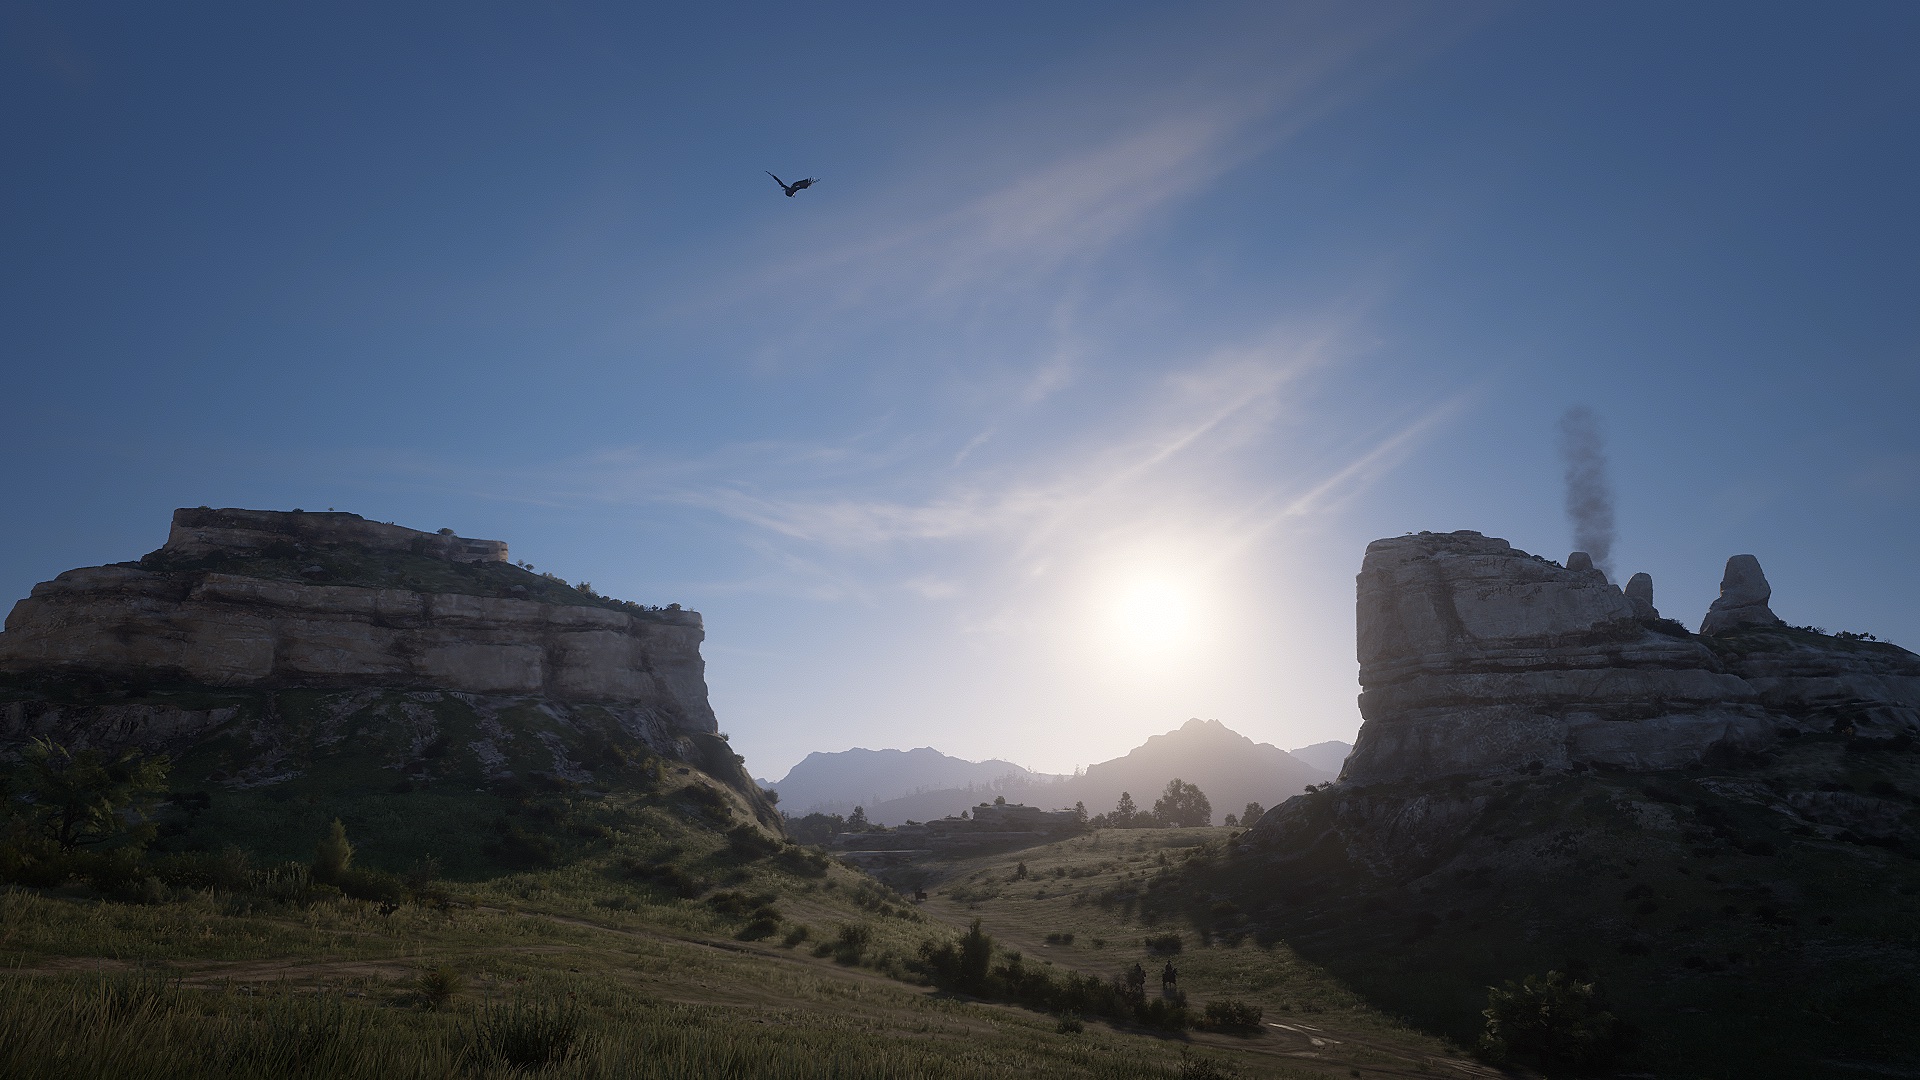 General 1920x1080 Red Dead 3 Arthur Morgan nature video games sky mountains